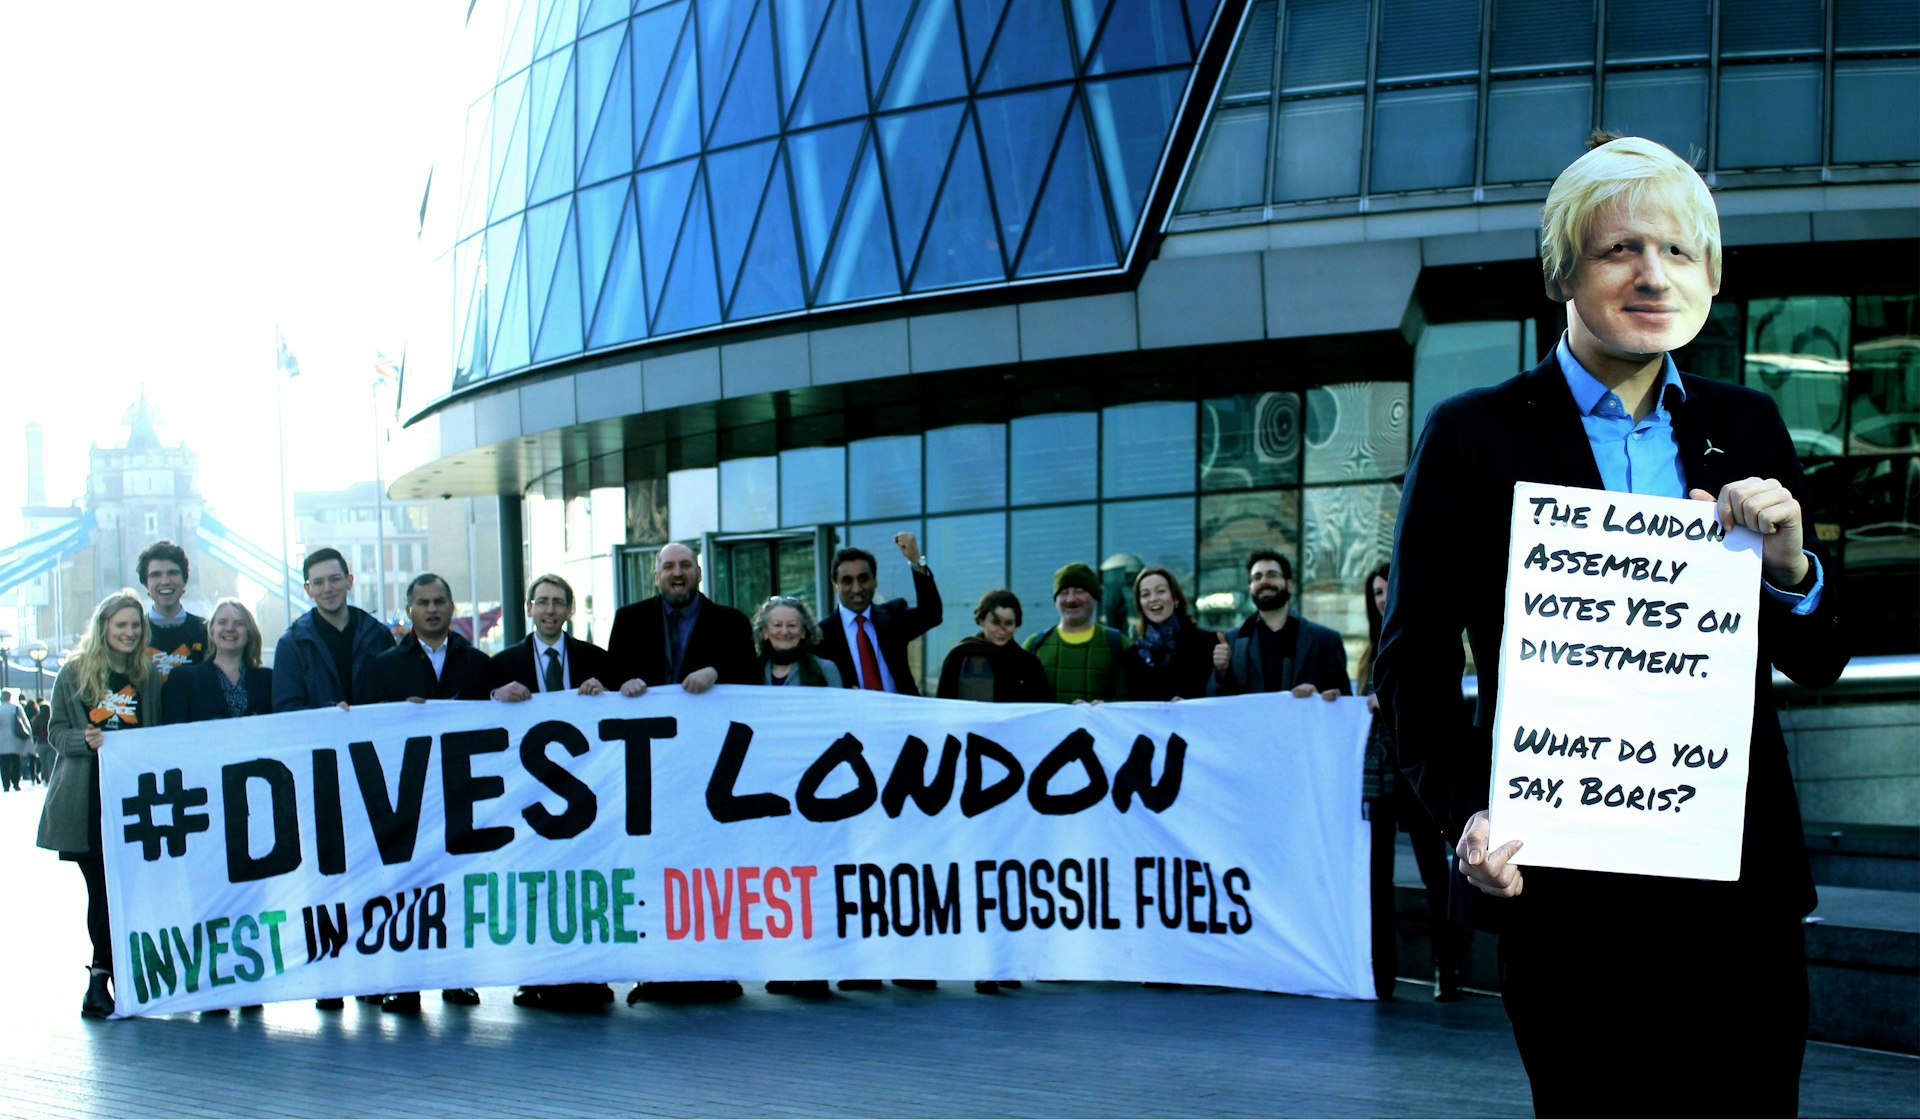 Five things you should know about fossil fuel divestment